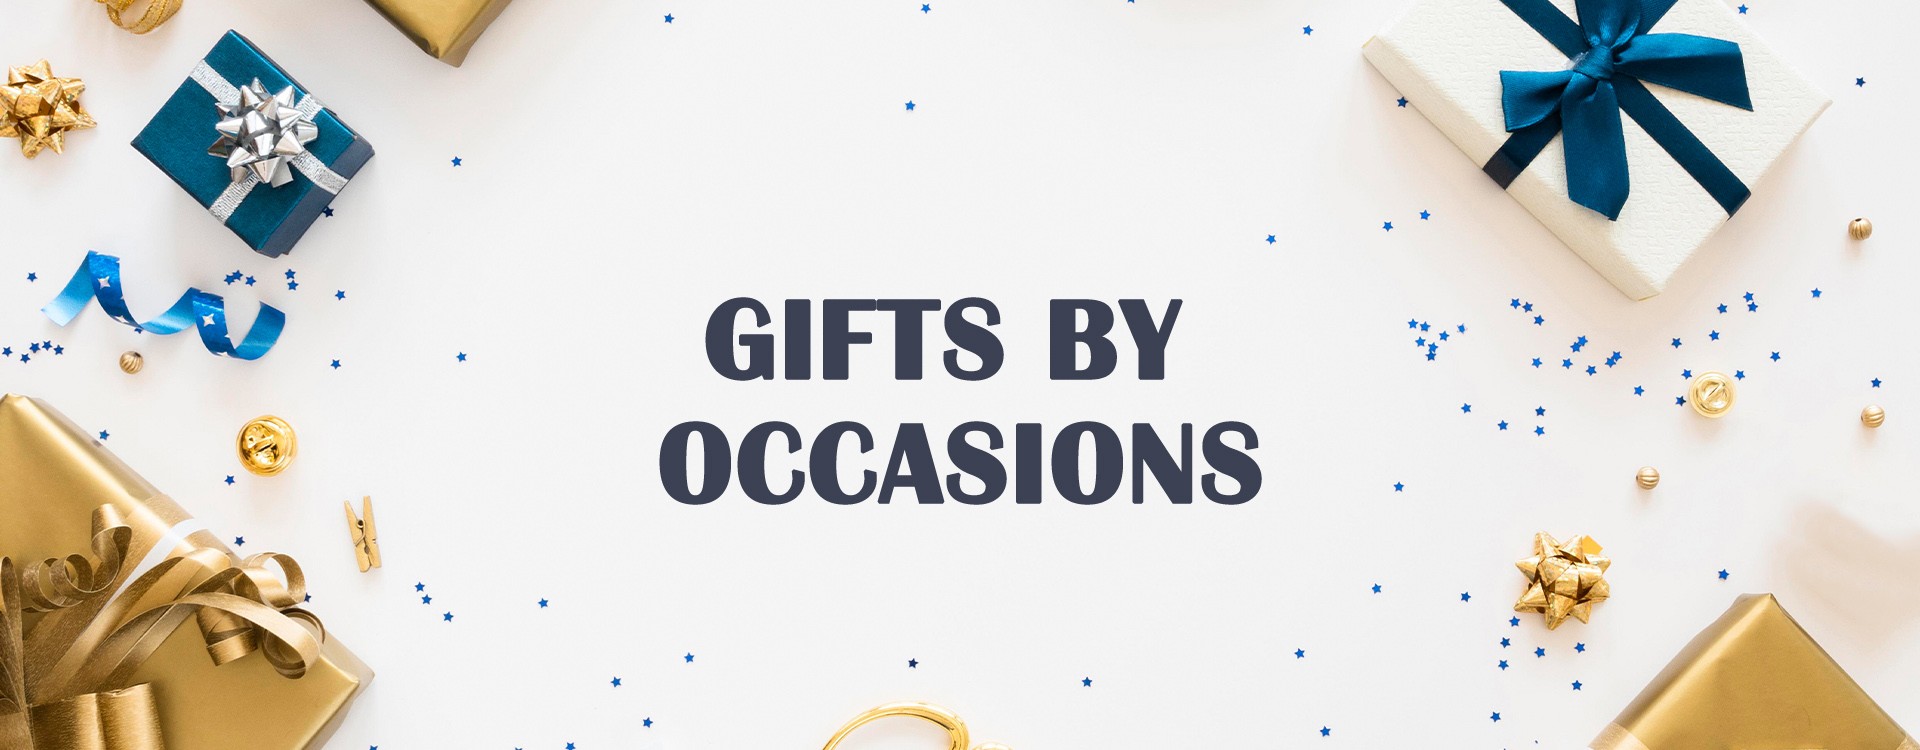 Gifts by Occasions